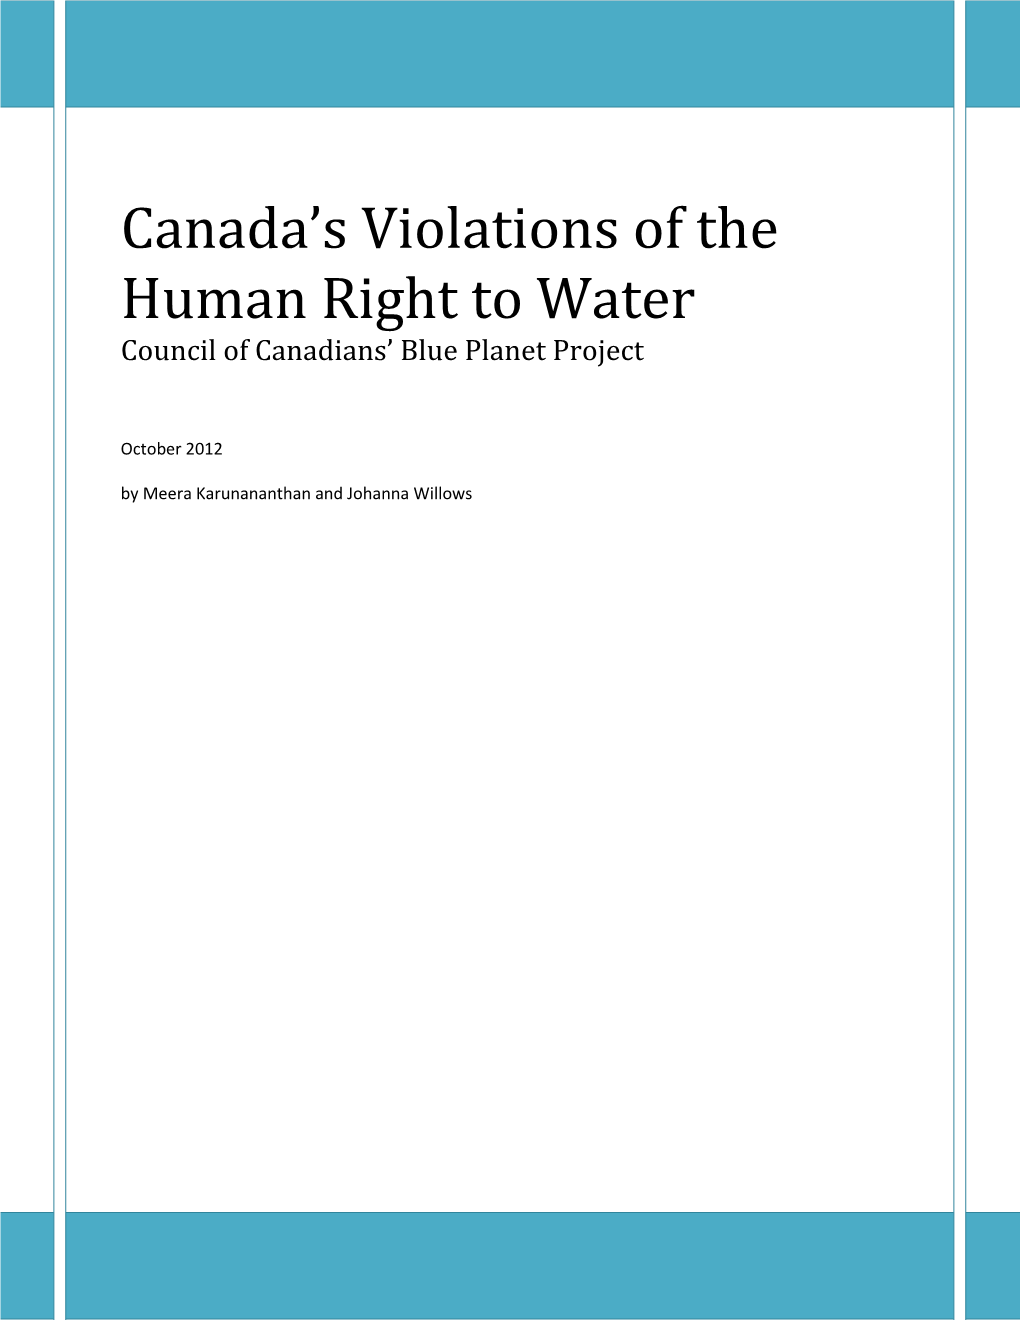 Canada's Violations of the Human Right to Water